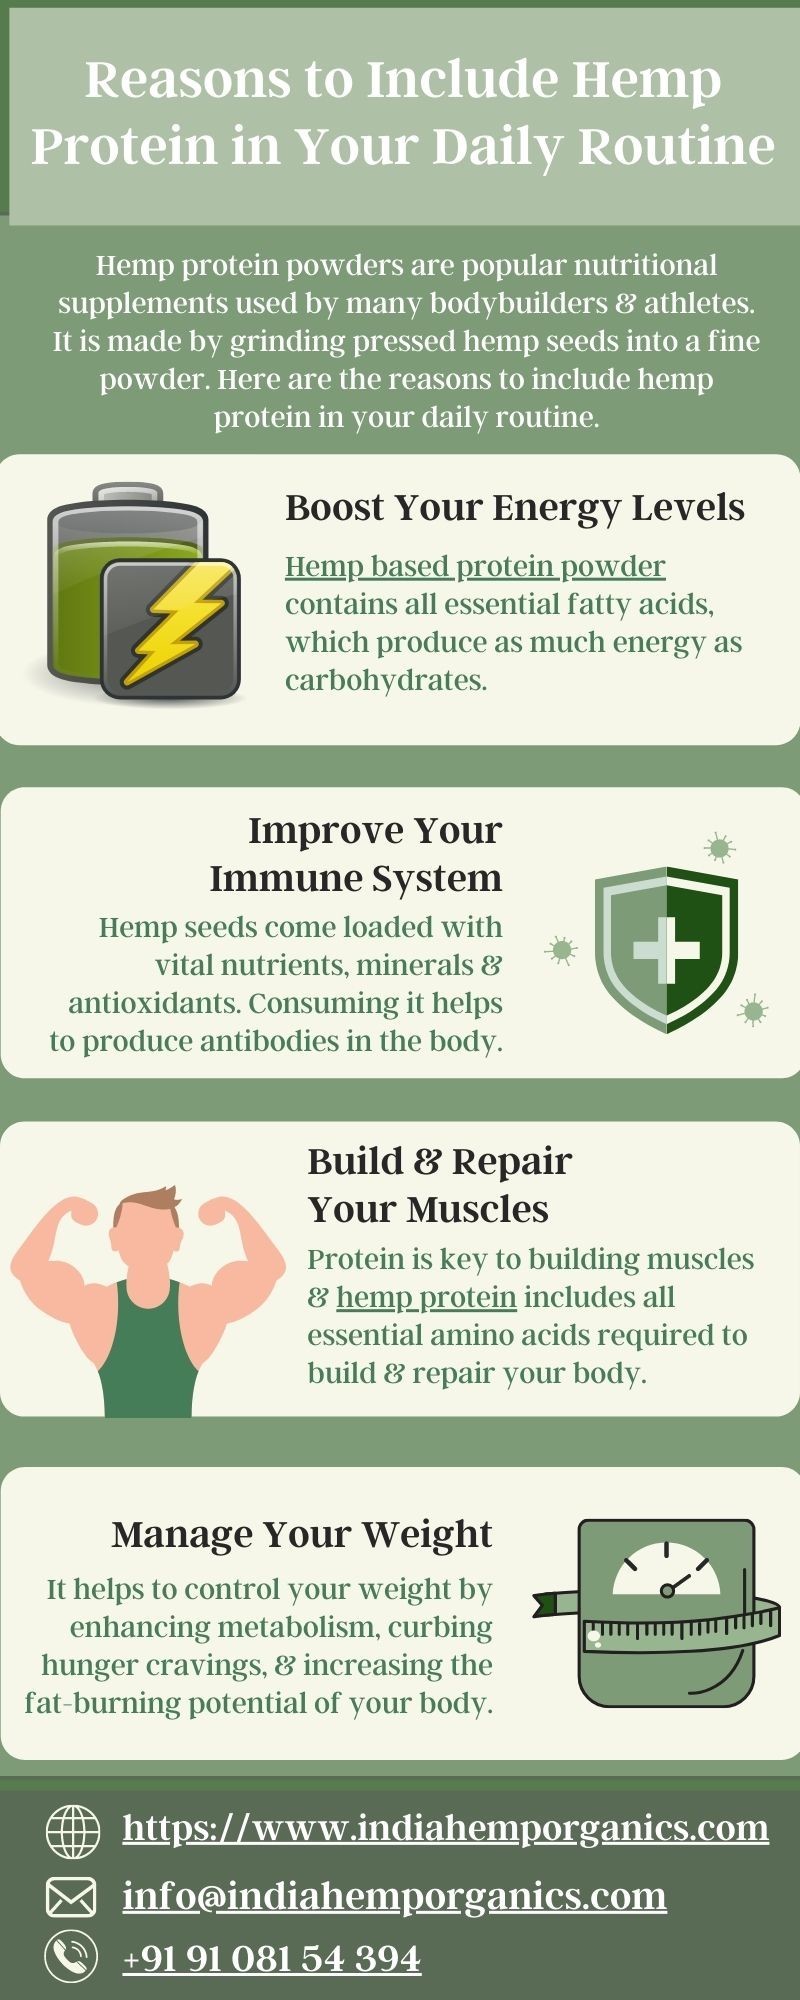 Reasons to Include Hemp Protein in Your Daily Routine